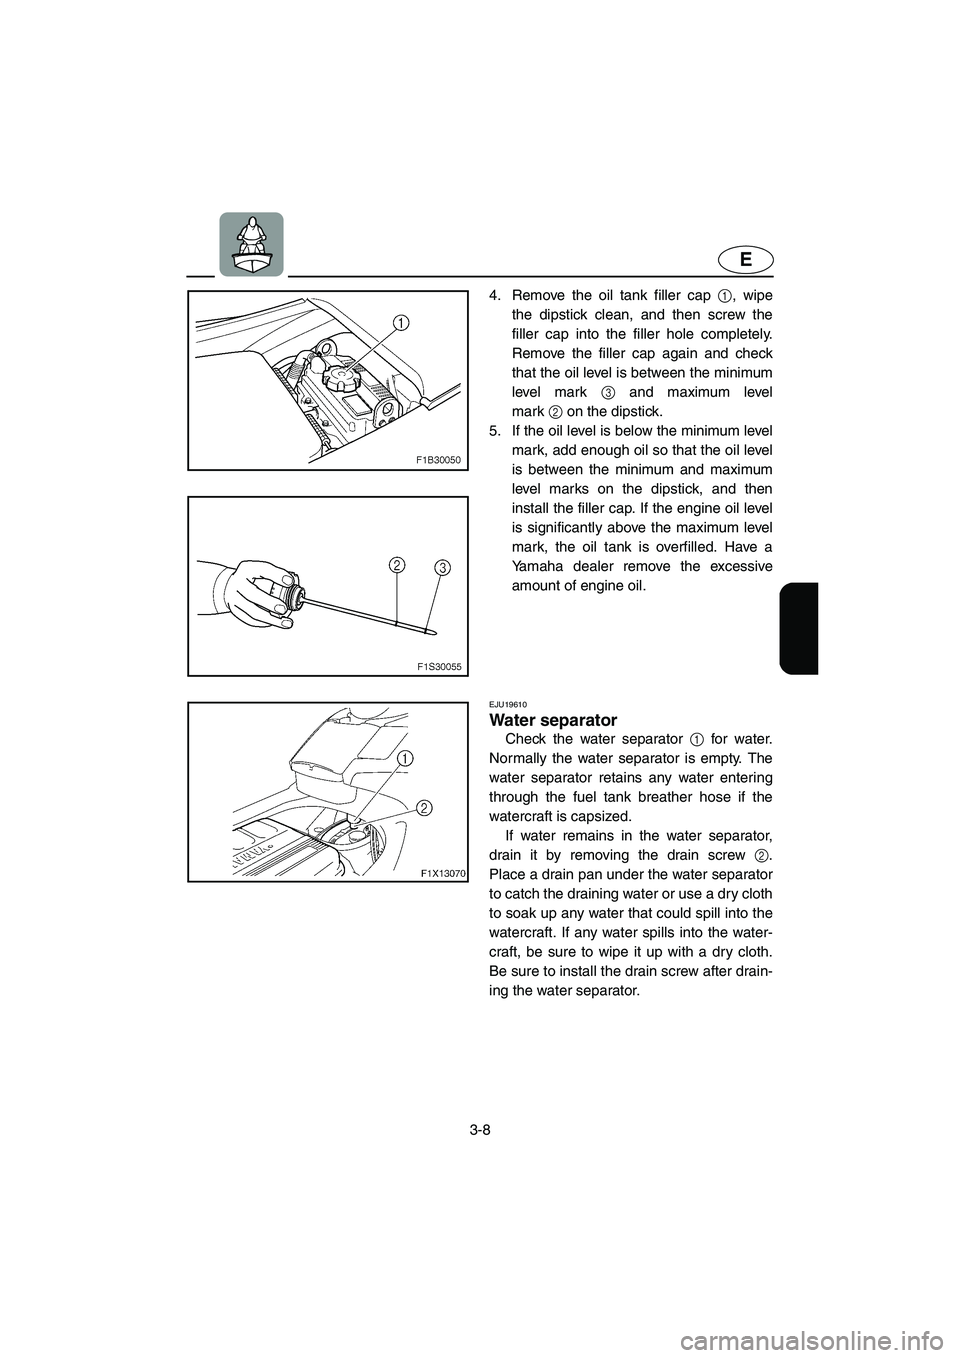 YAMAHA FX HO 2006  Owners Manual 3-8
E
4. Remove the oil tank filler cap 1, wipe
the dipstick clean, and then screw the
filler cap into the filler hole completely.
Remove the filler cap again and check
that the oil level is between t